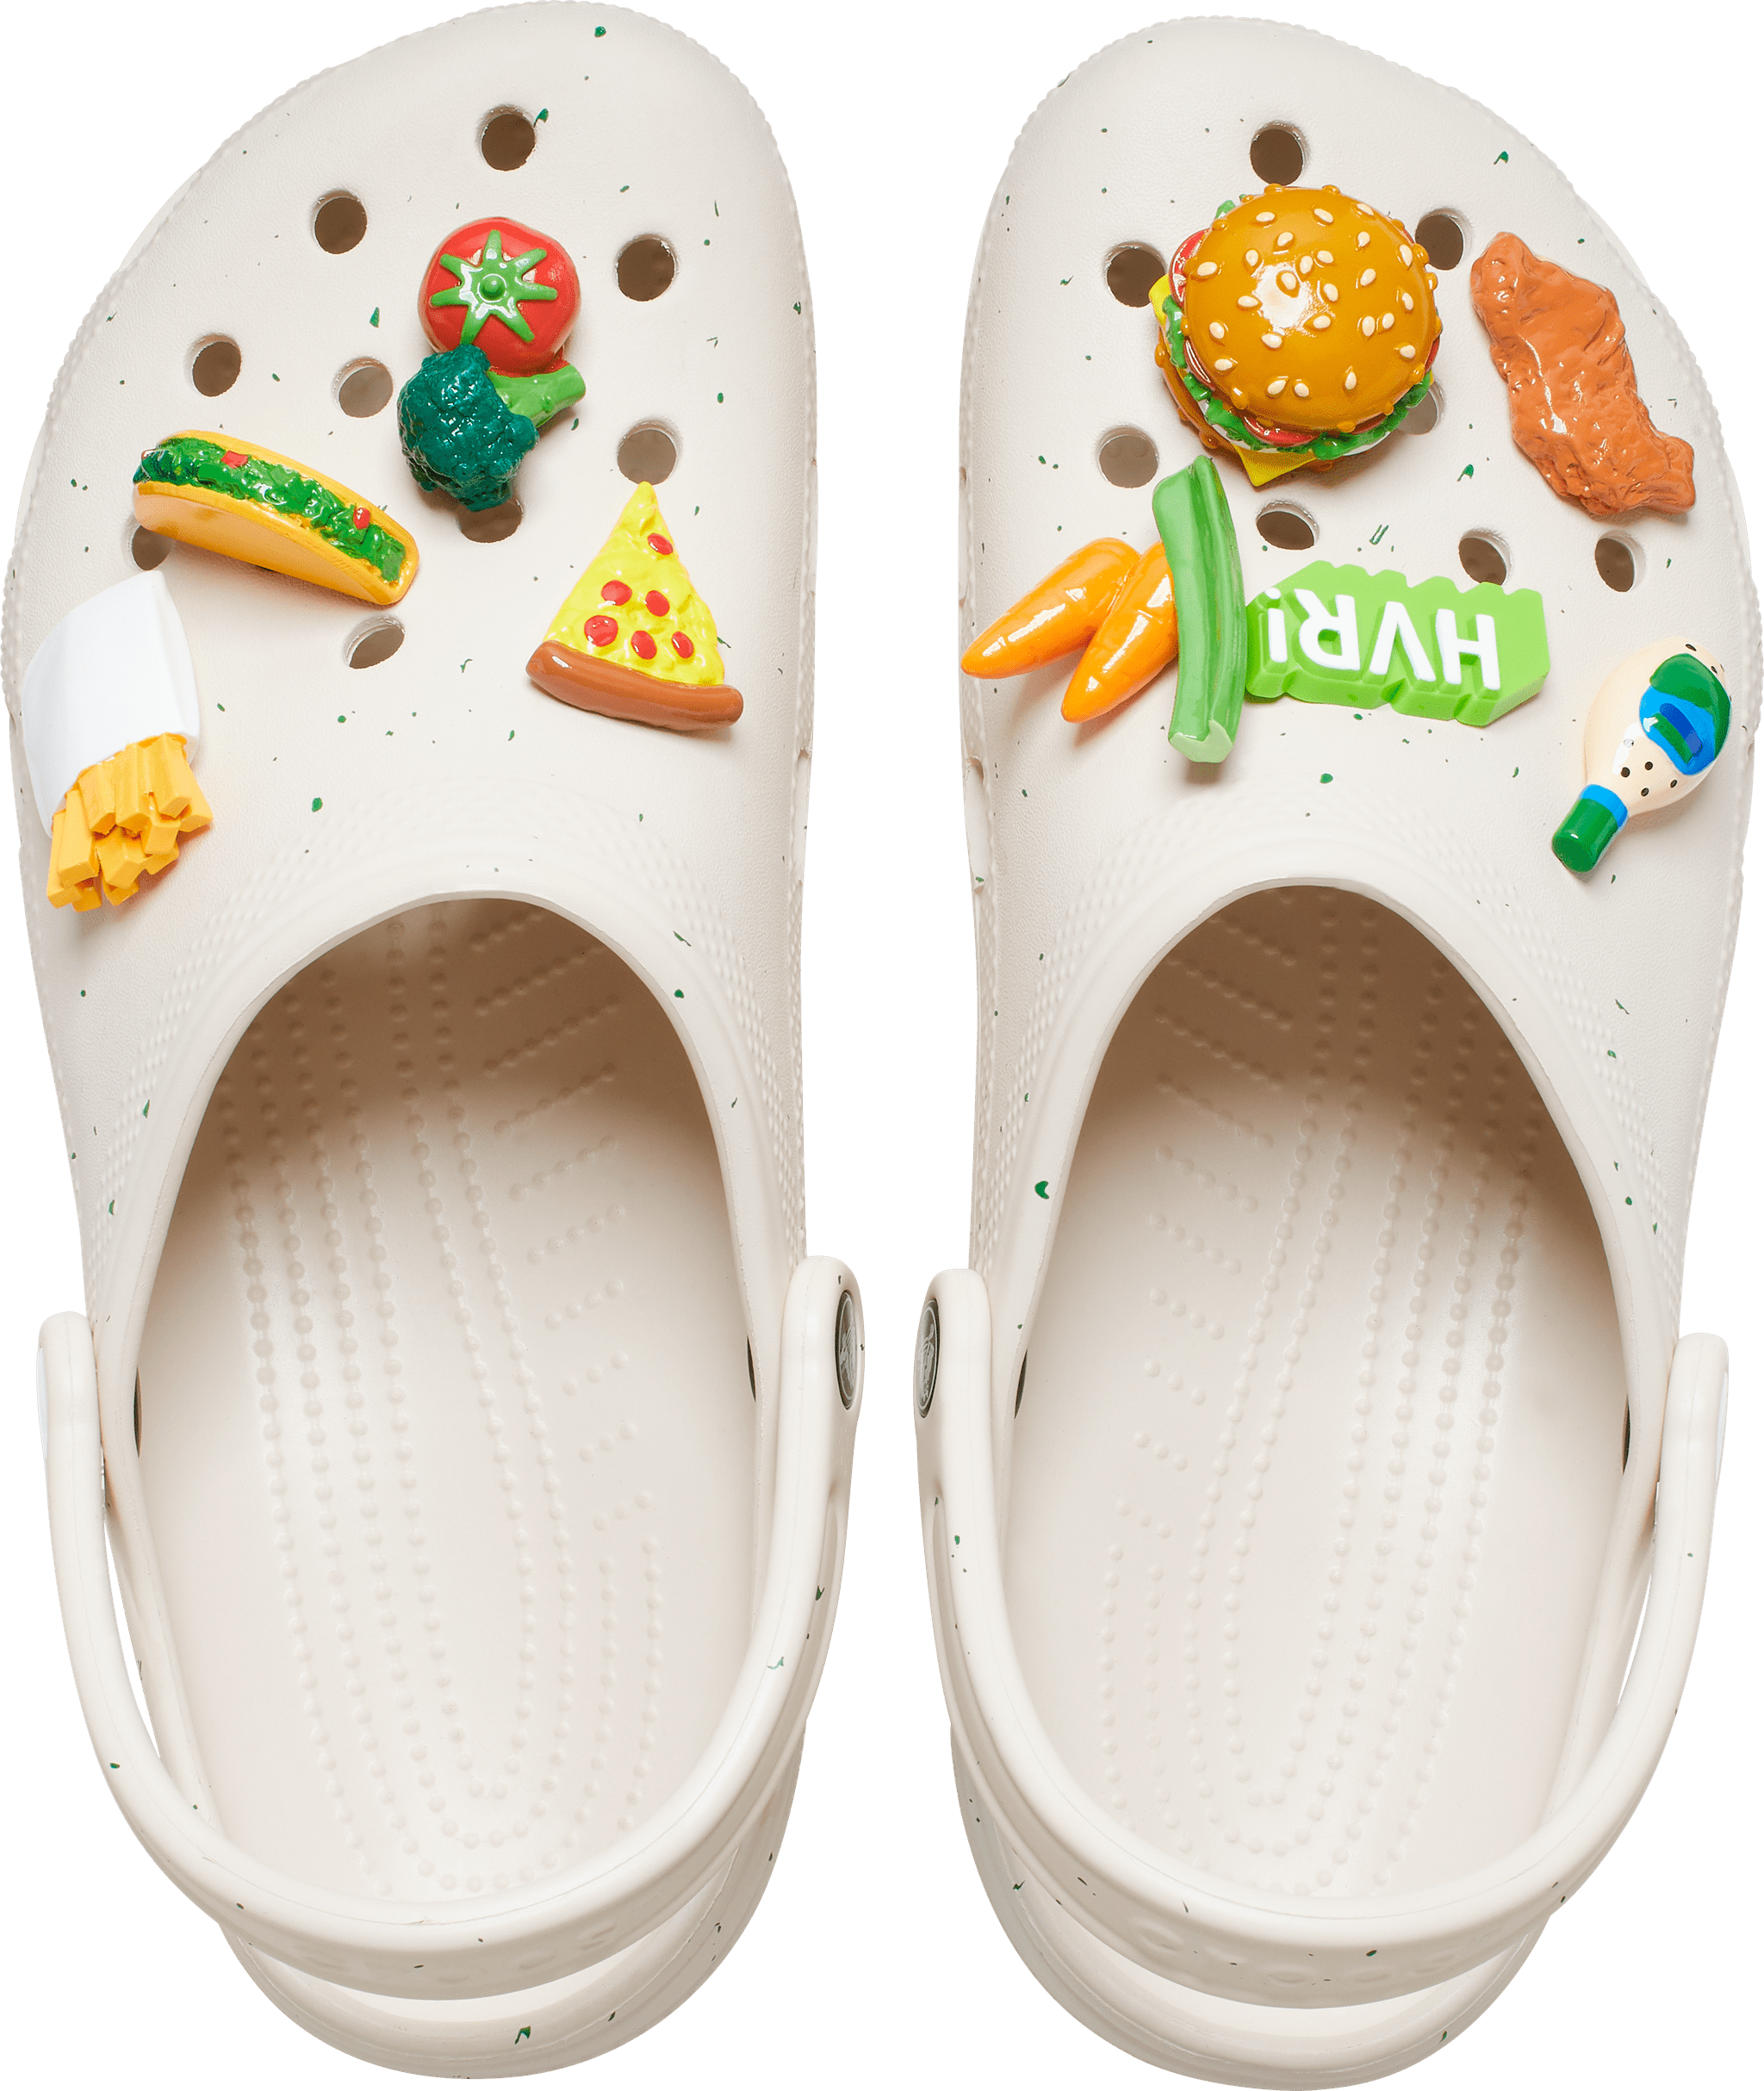 Hidden Valley x Crocs Shoes Are Available to Purchase | POPSUGAR Food